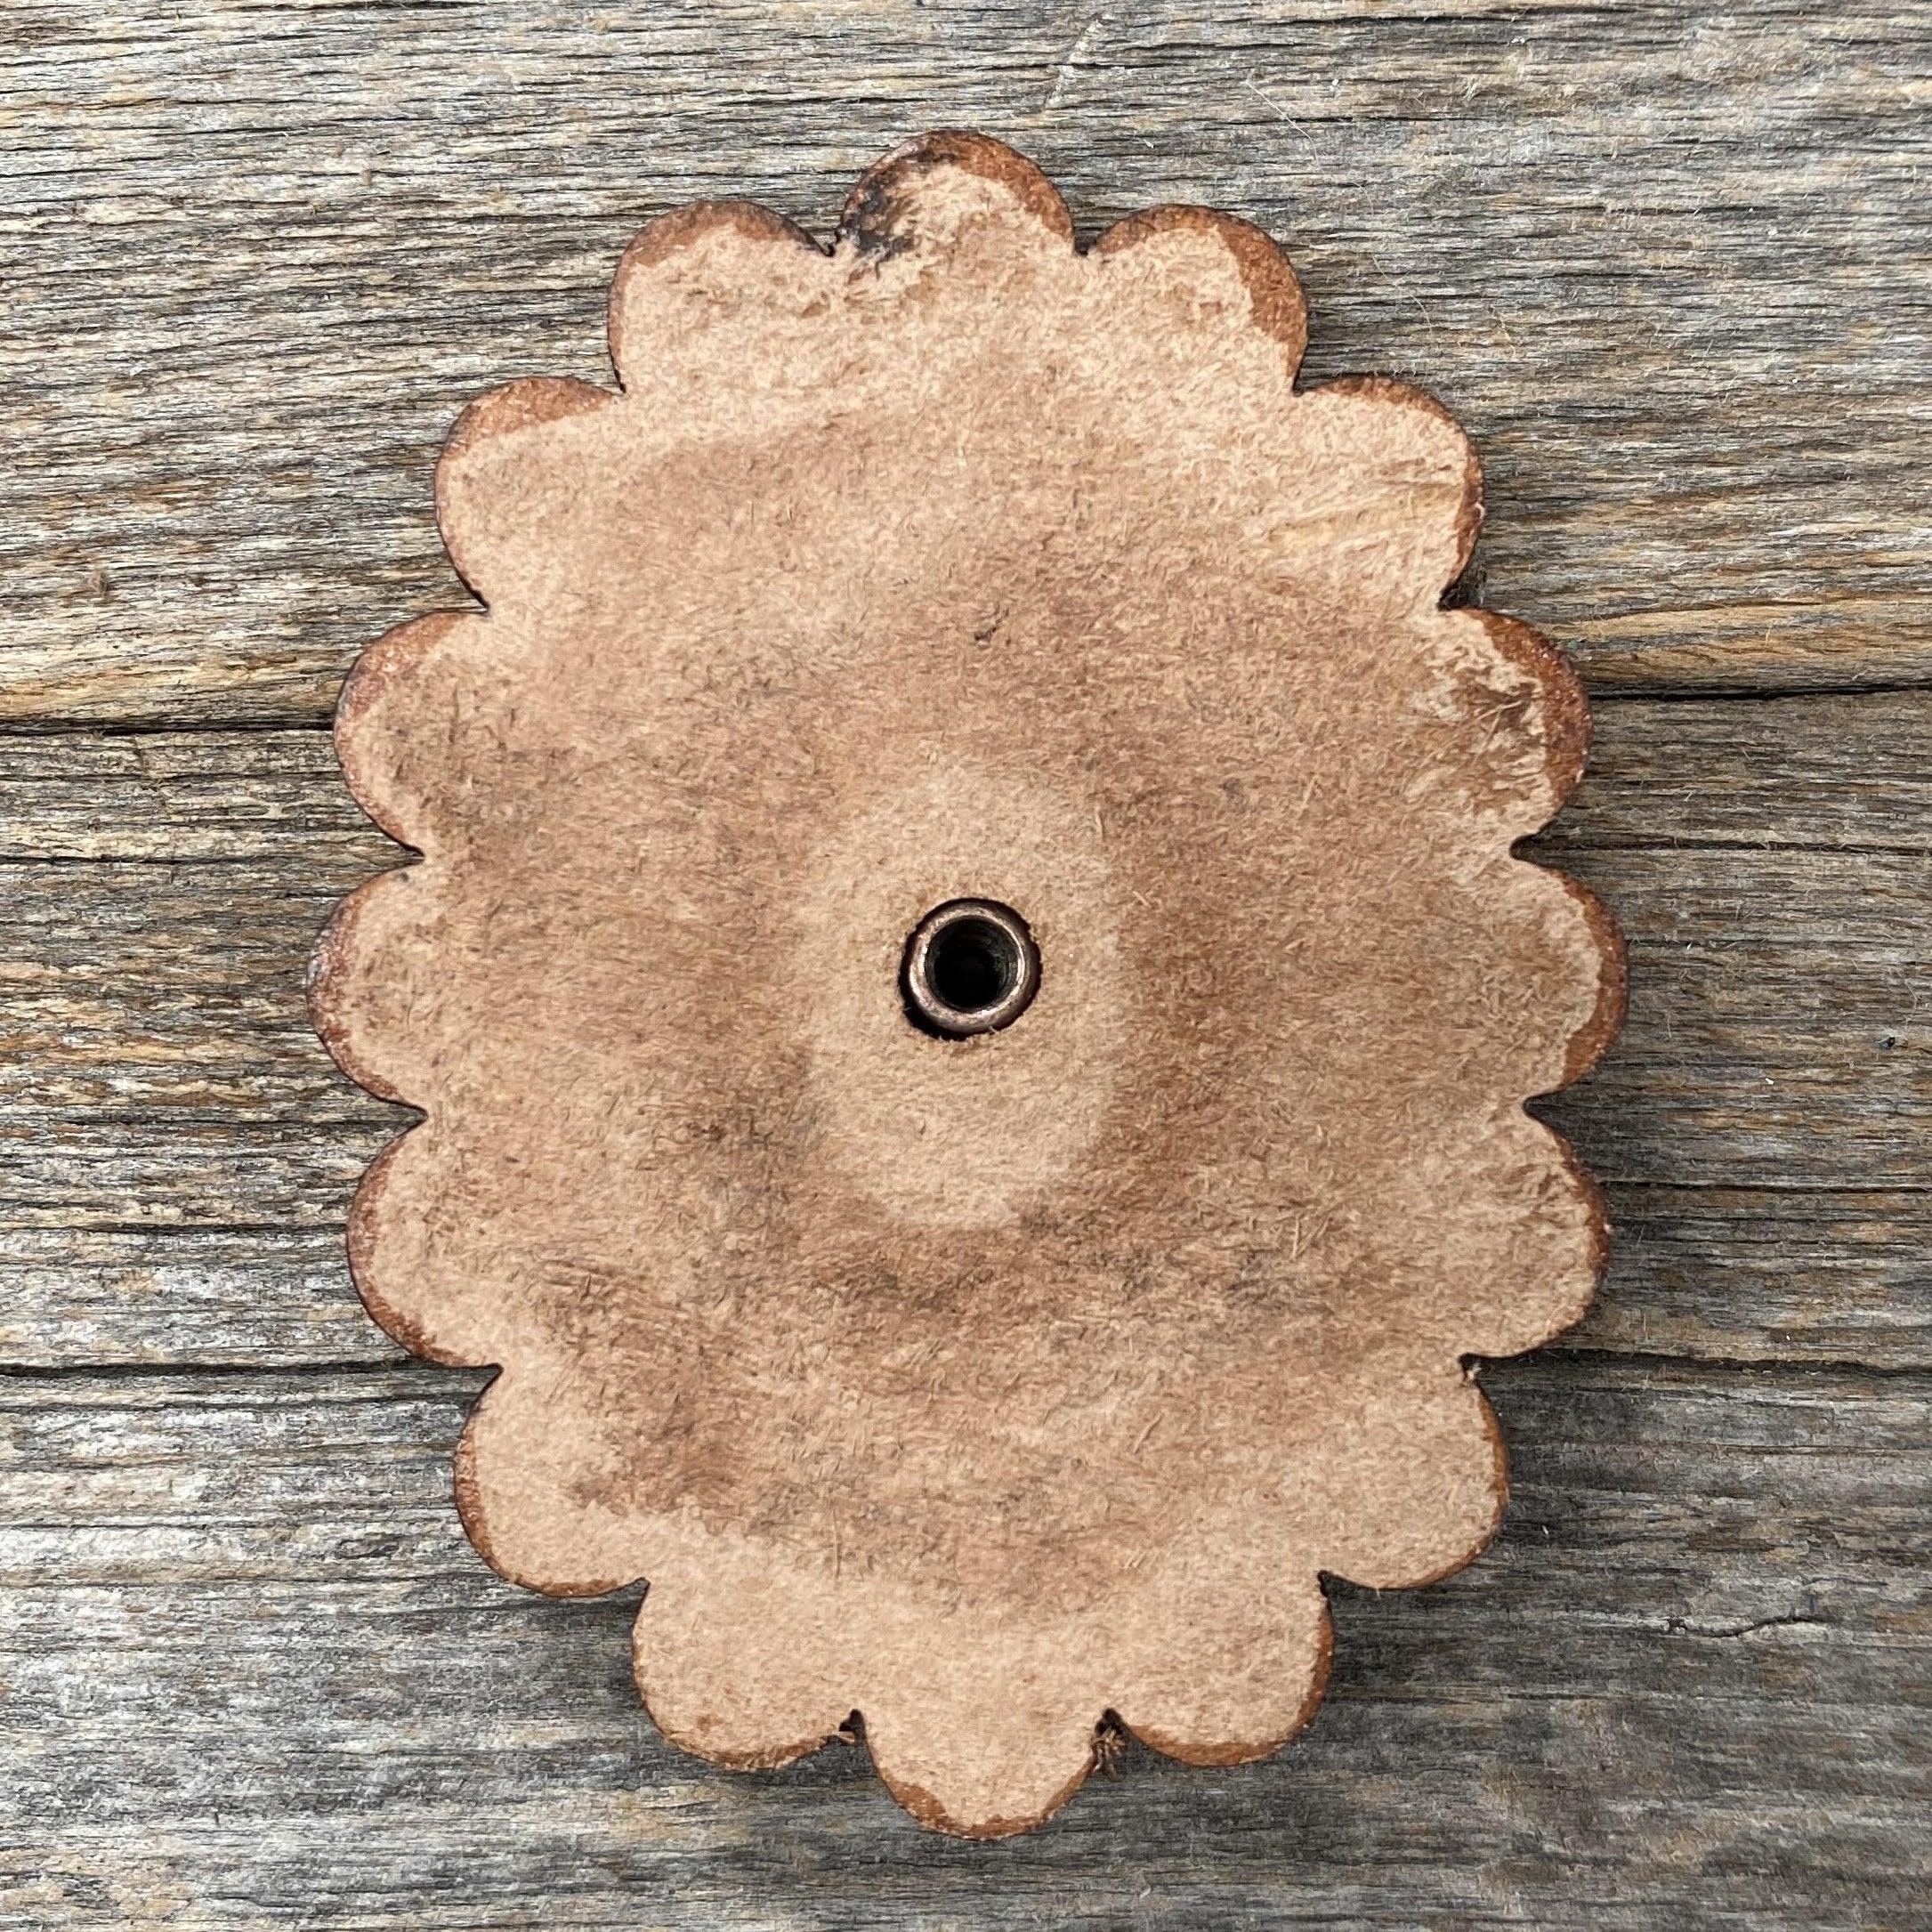 Leather Rosette Medium Oil Edges with Rust Cabochon Western Concho R107CABRU - RODEO DRIVE